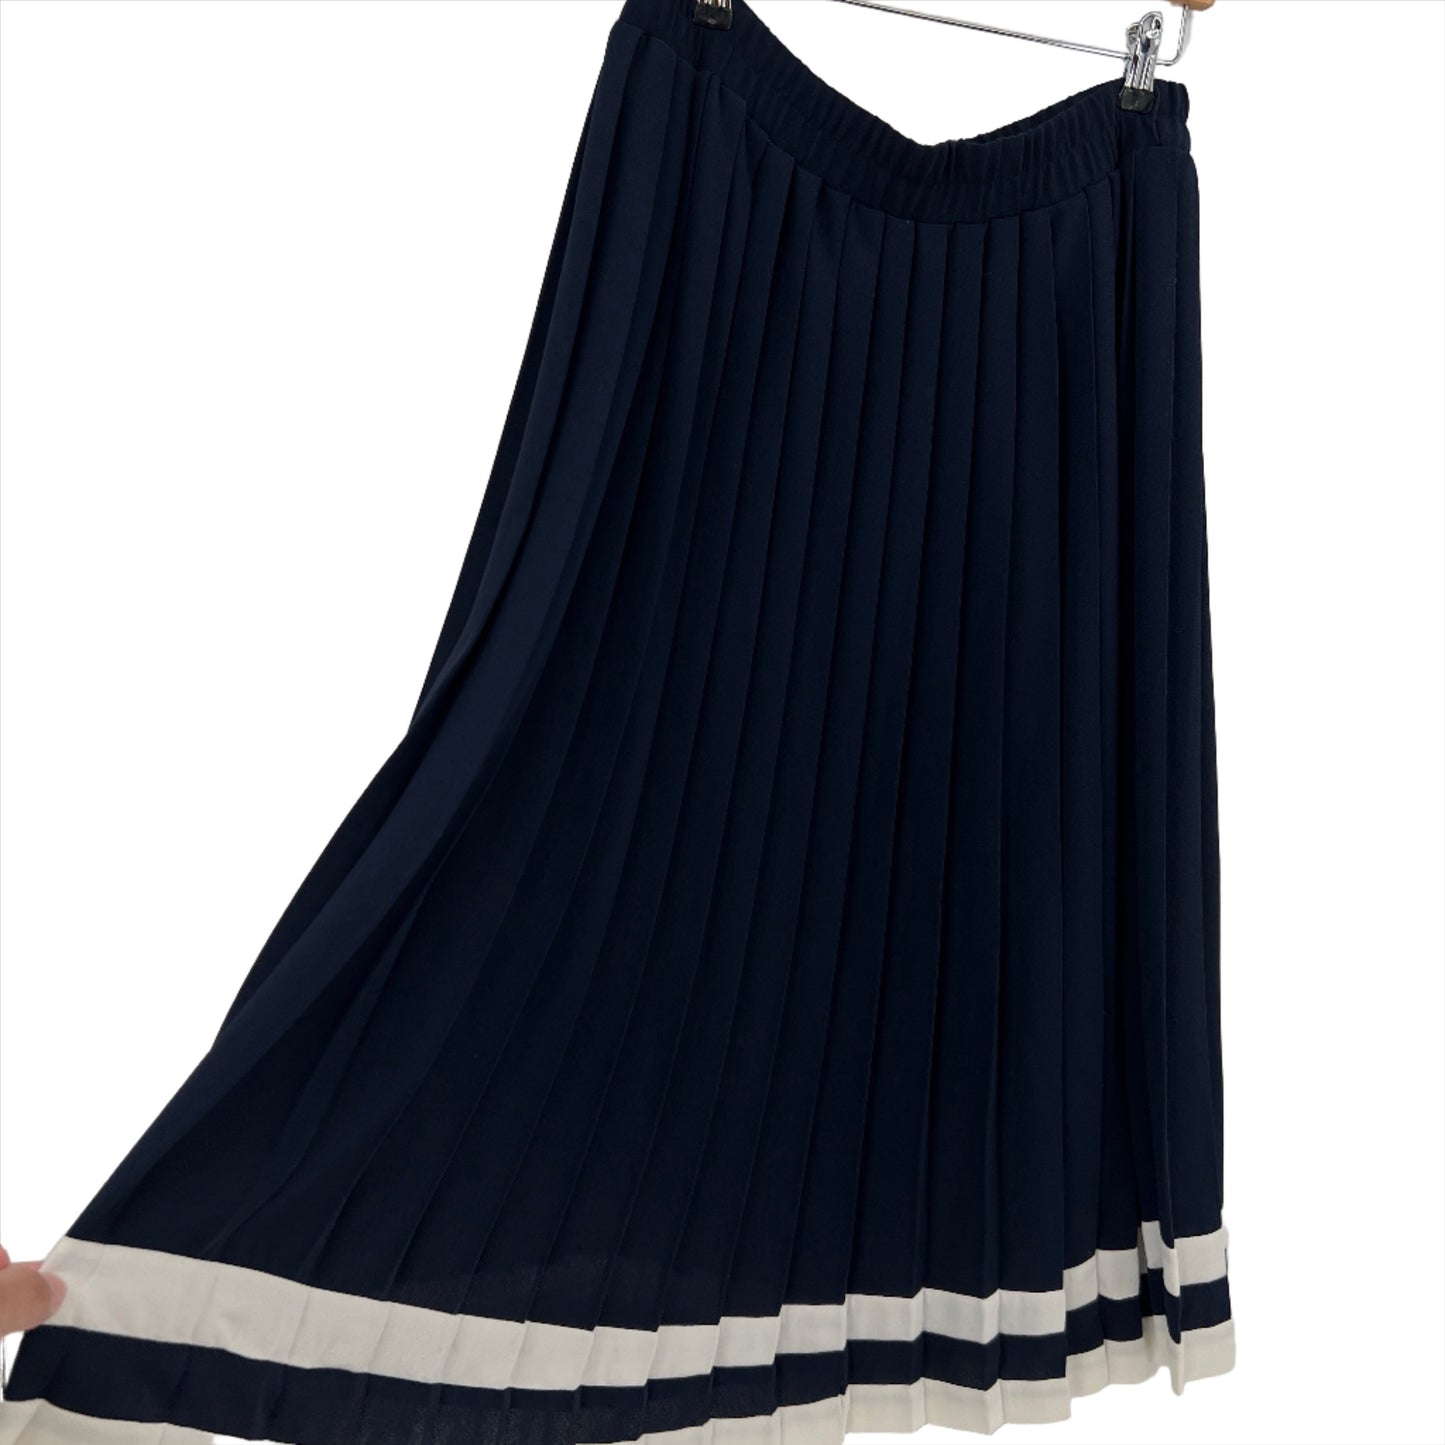 SOLD. Vintage Chaus Pleaded Nautical Maxi Skirt 12